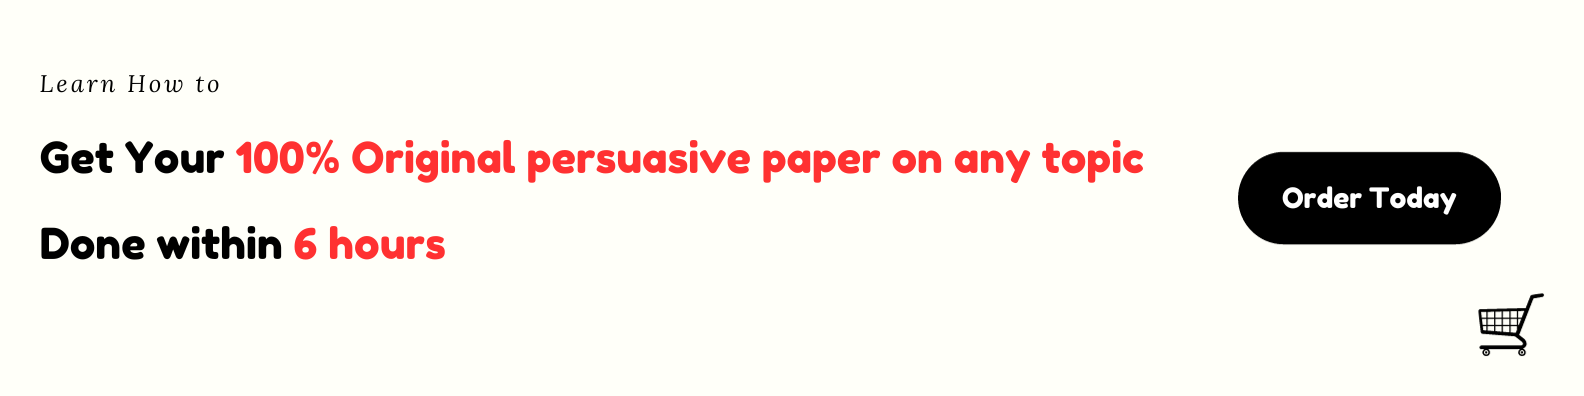 get your original persuasive essay paper today at affordable rate from capable writers